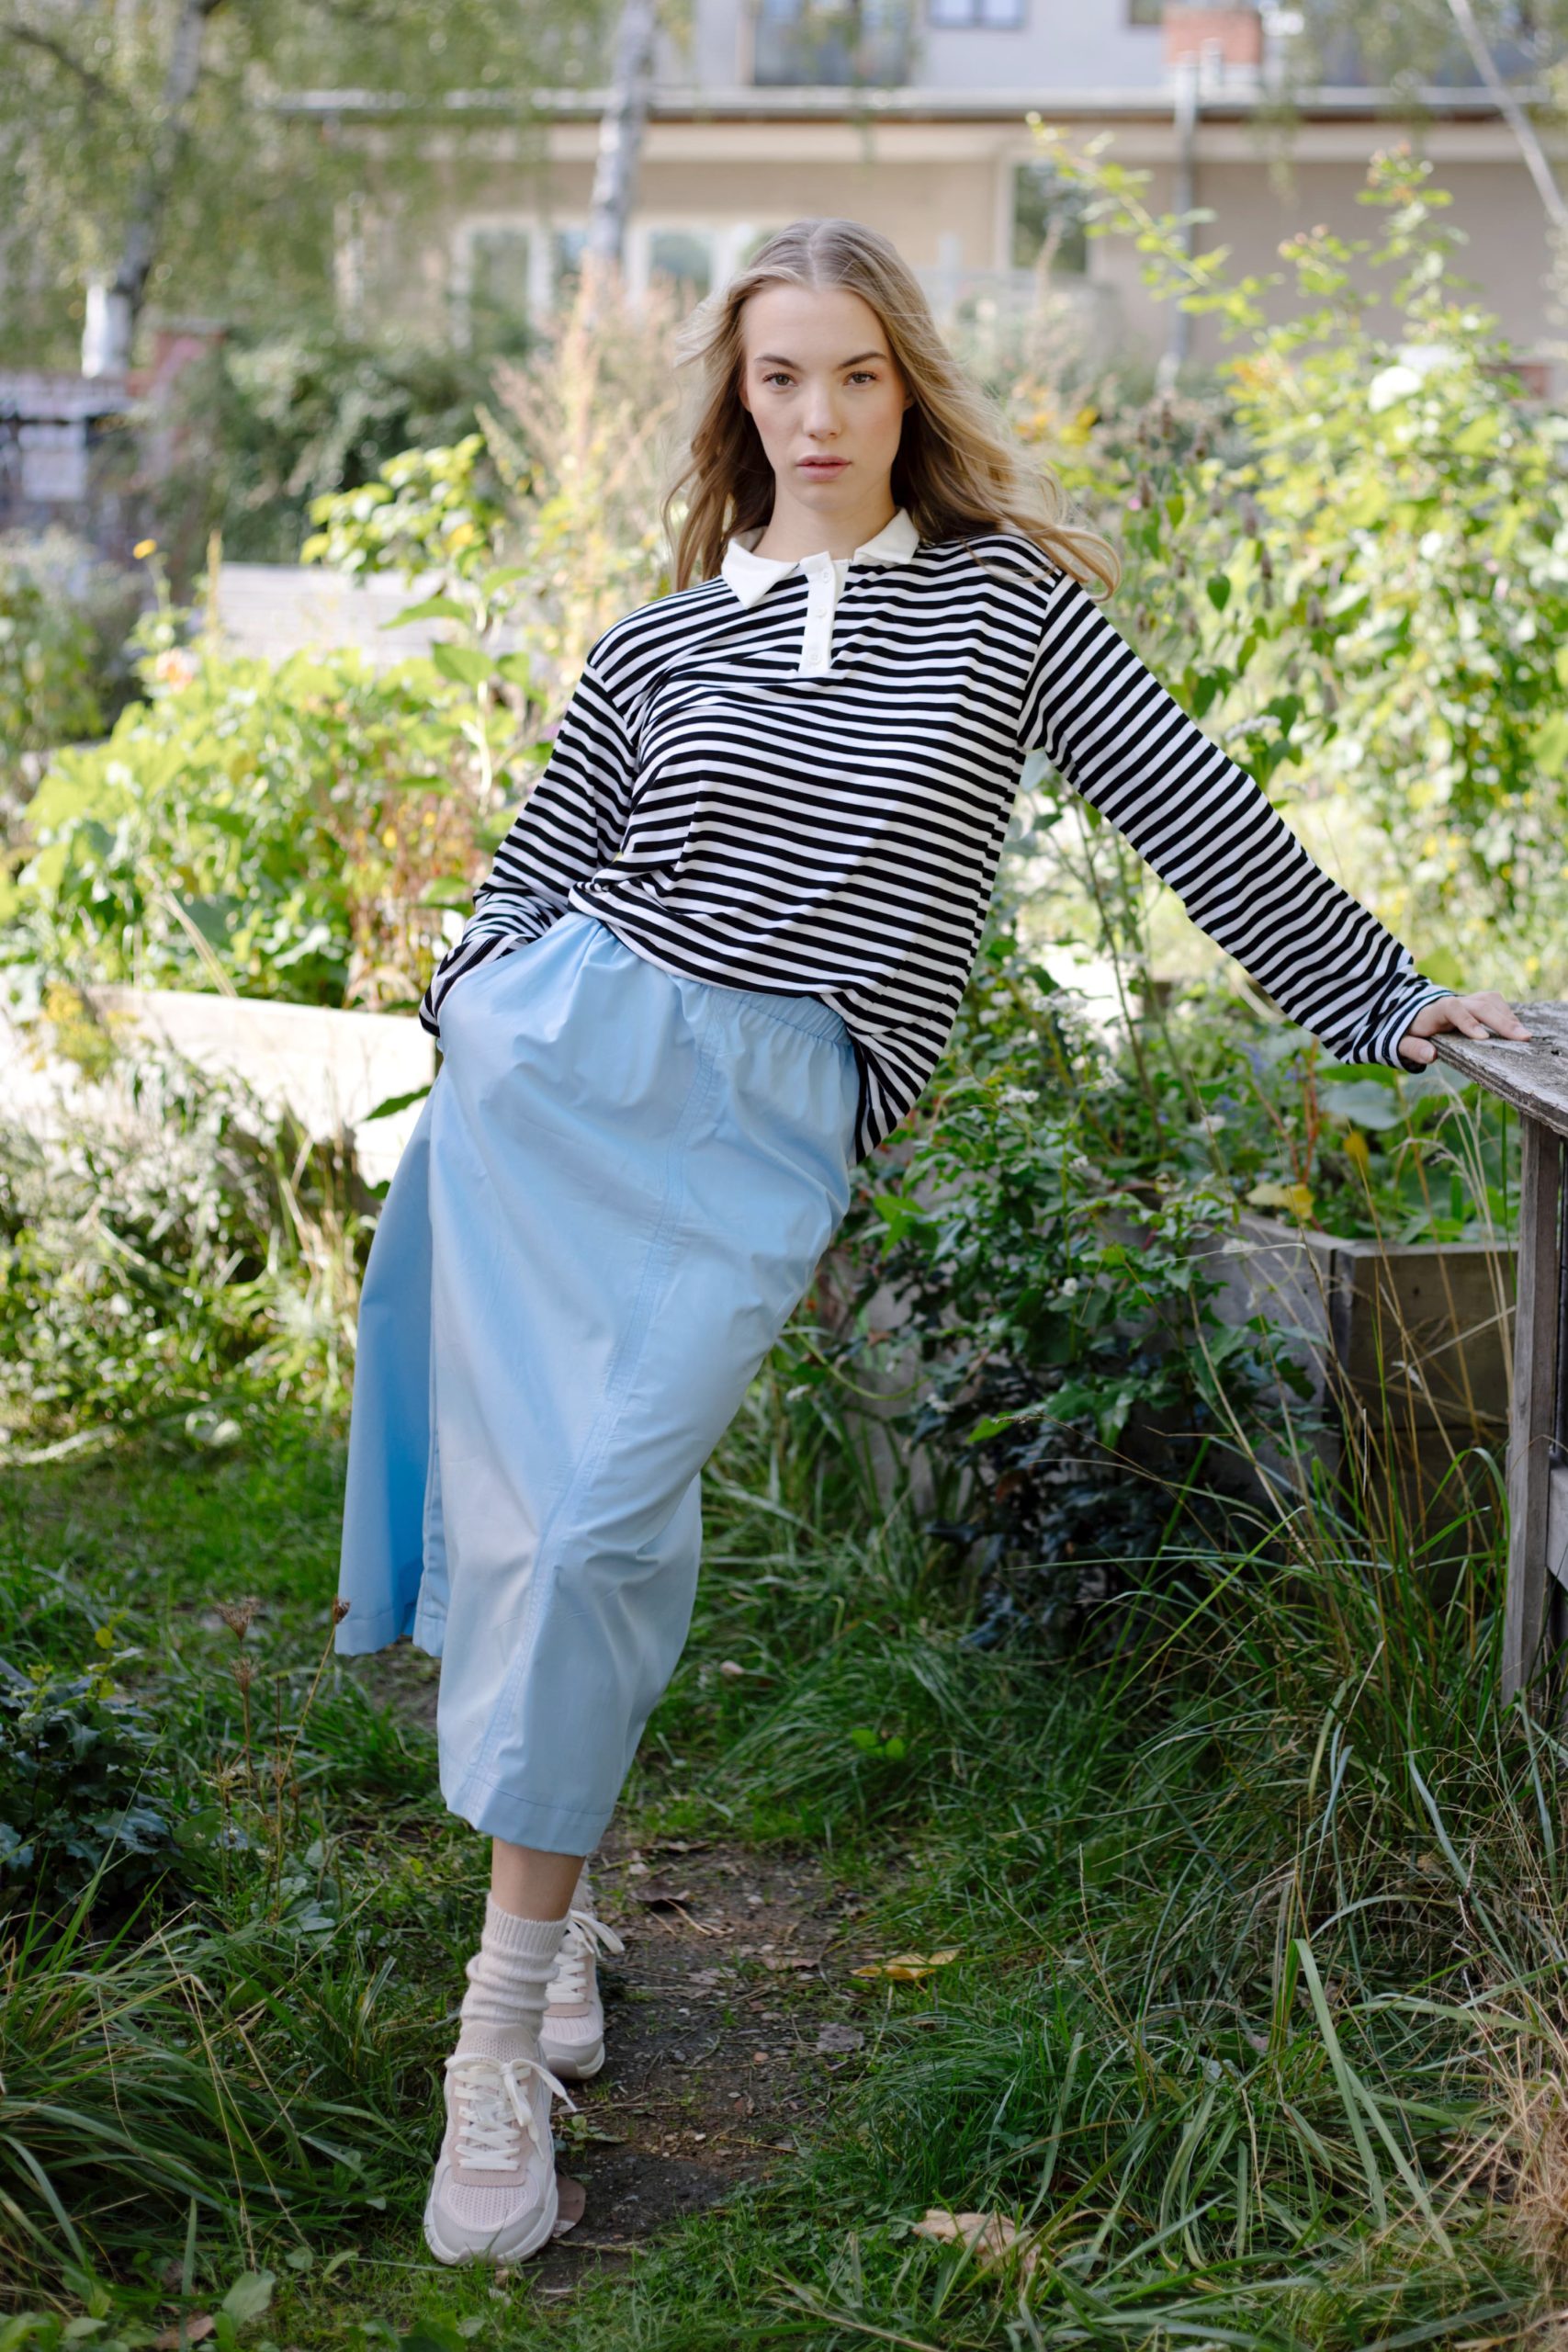 Woman wearing the Holly Skirt sewing pattern from JULIANA MARTEJEVS on The Fold Line. A skirt pattern made in cotton poplin fabrics, featuring a midi length, elastic waistband, in-seam pockets and relaxed fit.